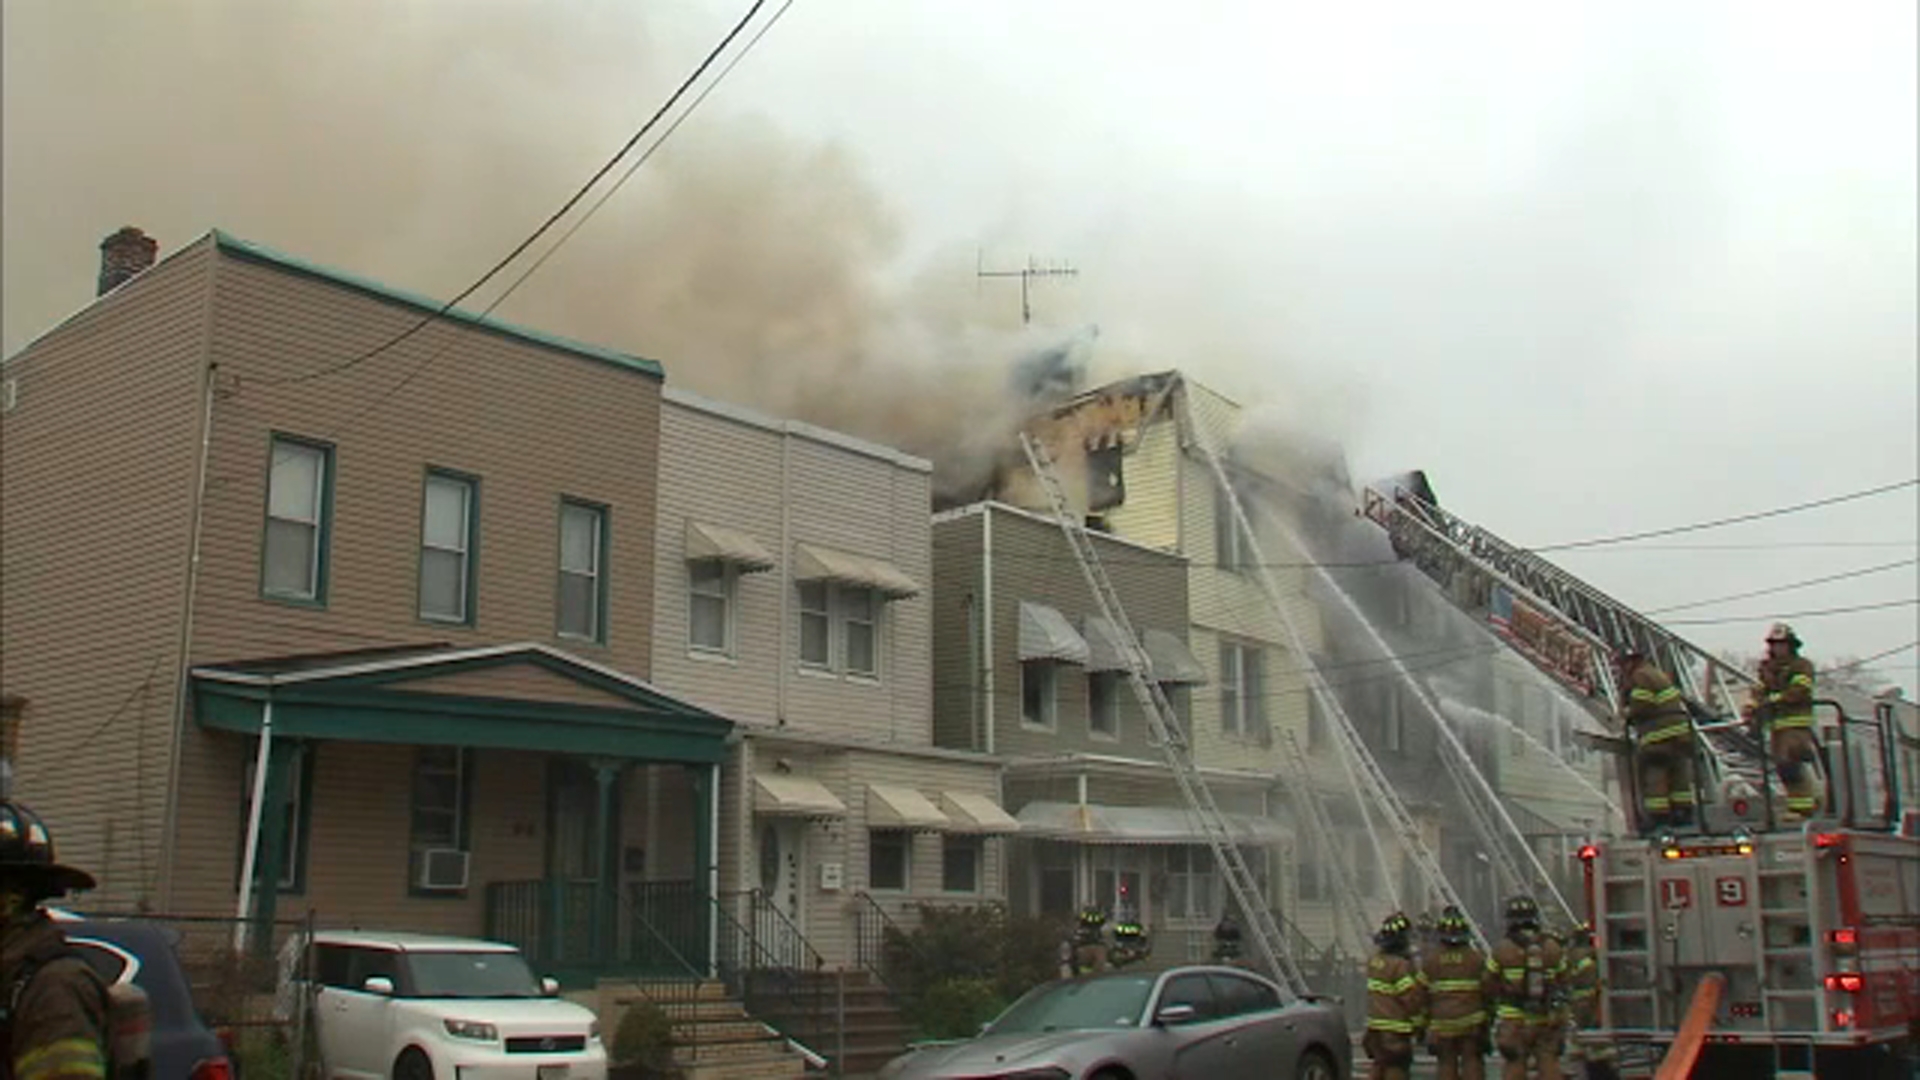 4-alarm fire burning in Jersey City